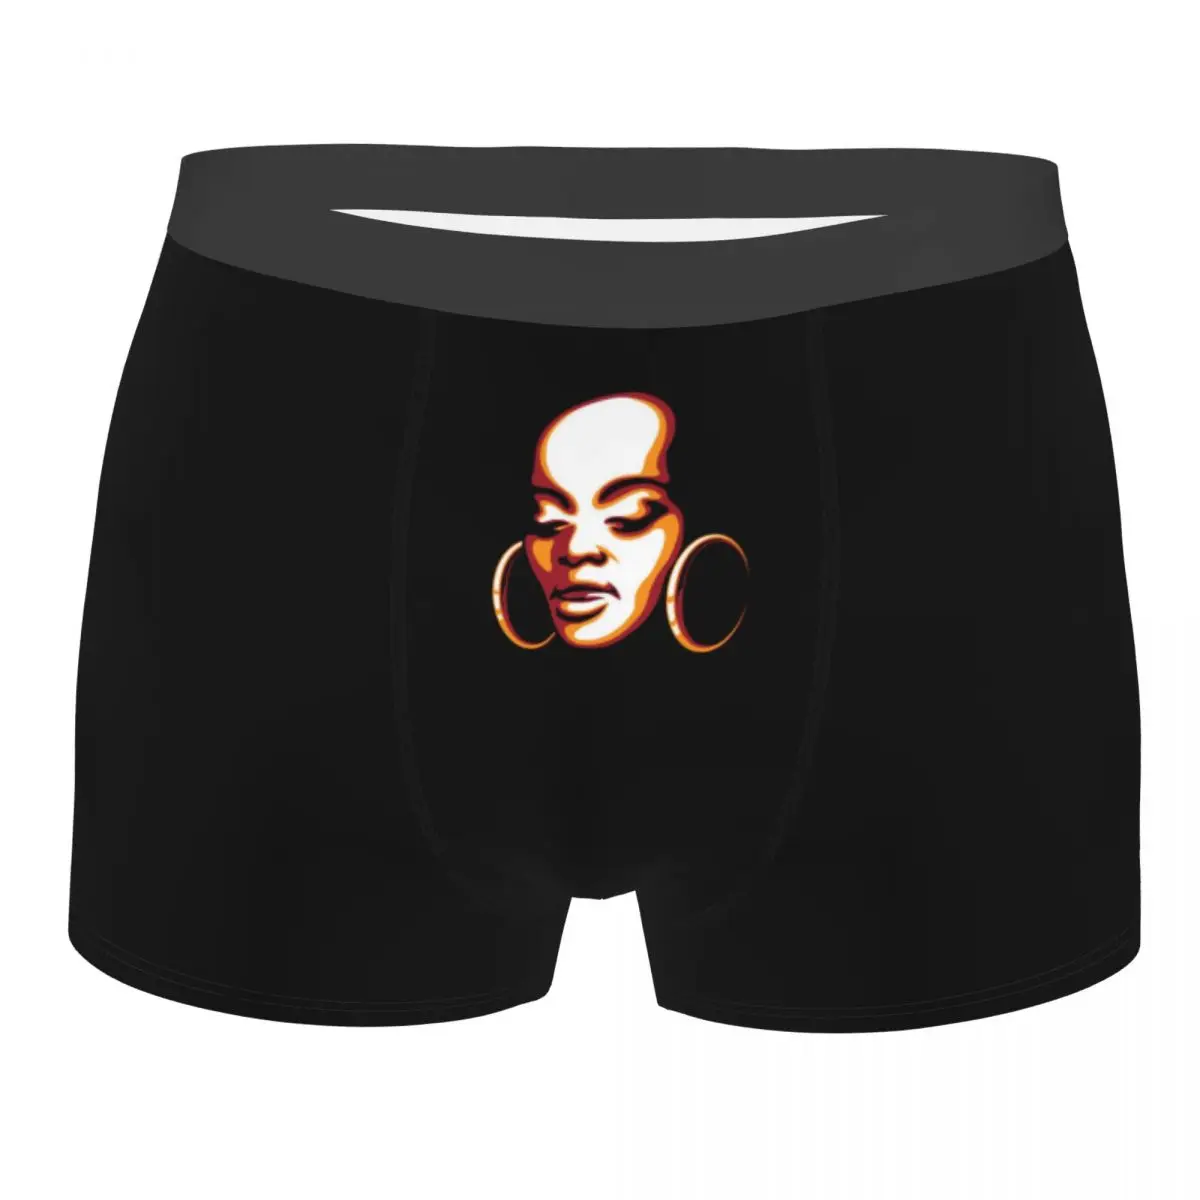 Men's Panties Underpants Boxers Underwear African Woman Face Sexy Male Shorts